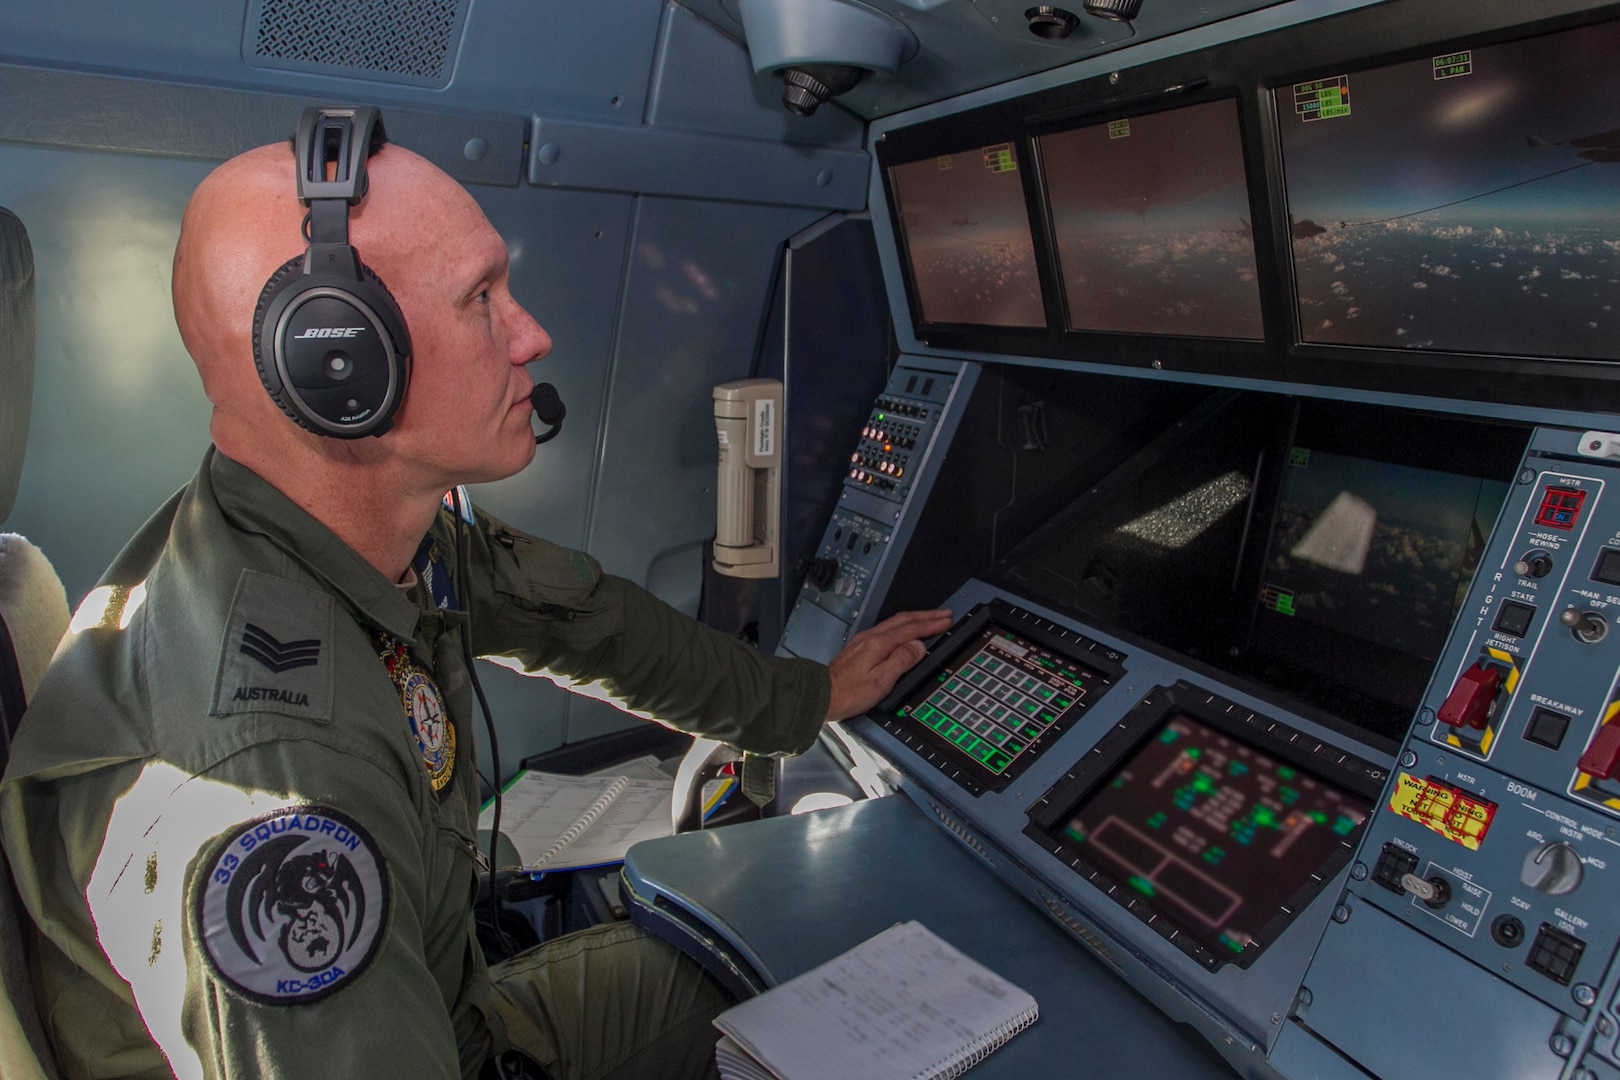 Aerial Refuelling Operator Sergeant Leigh Coop from No 33 Squadron conducts Air to Air refuelling operations from an RAAF KC-30 Multi Role Tanker Transport aircraft. RAAF Base Amberley is the main operating base for RAAF and United States aircraft activities during Talisman Saber 2017. (Royal Australian Air Force photo by Sgt. Peter Borys)